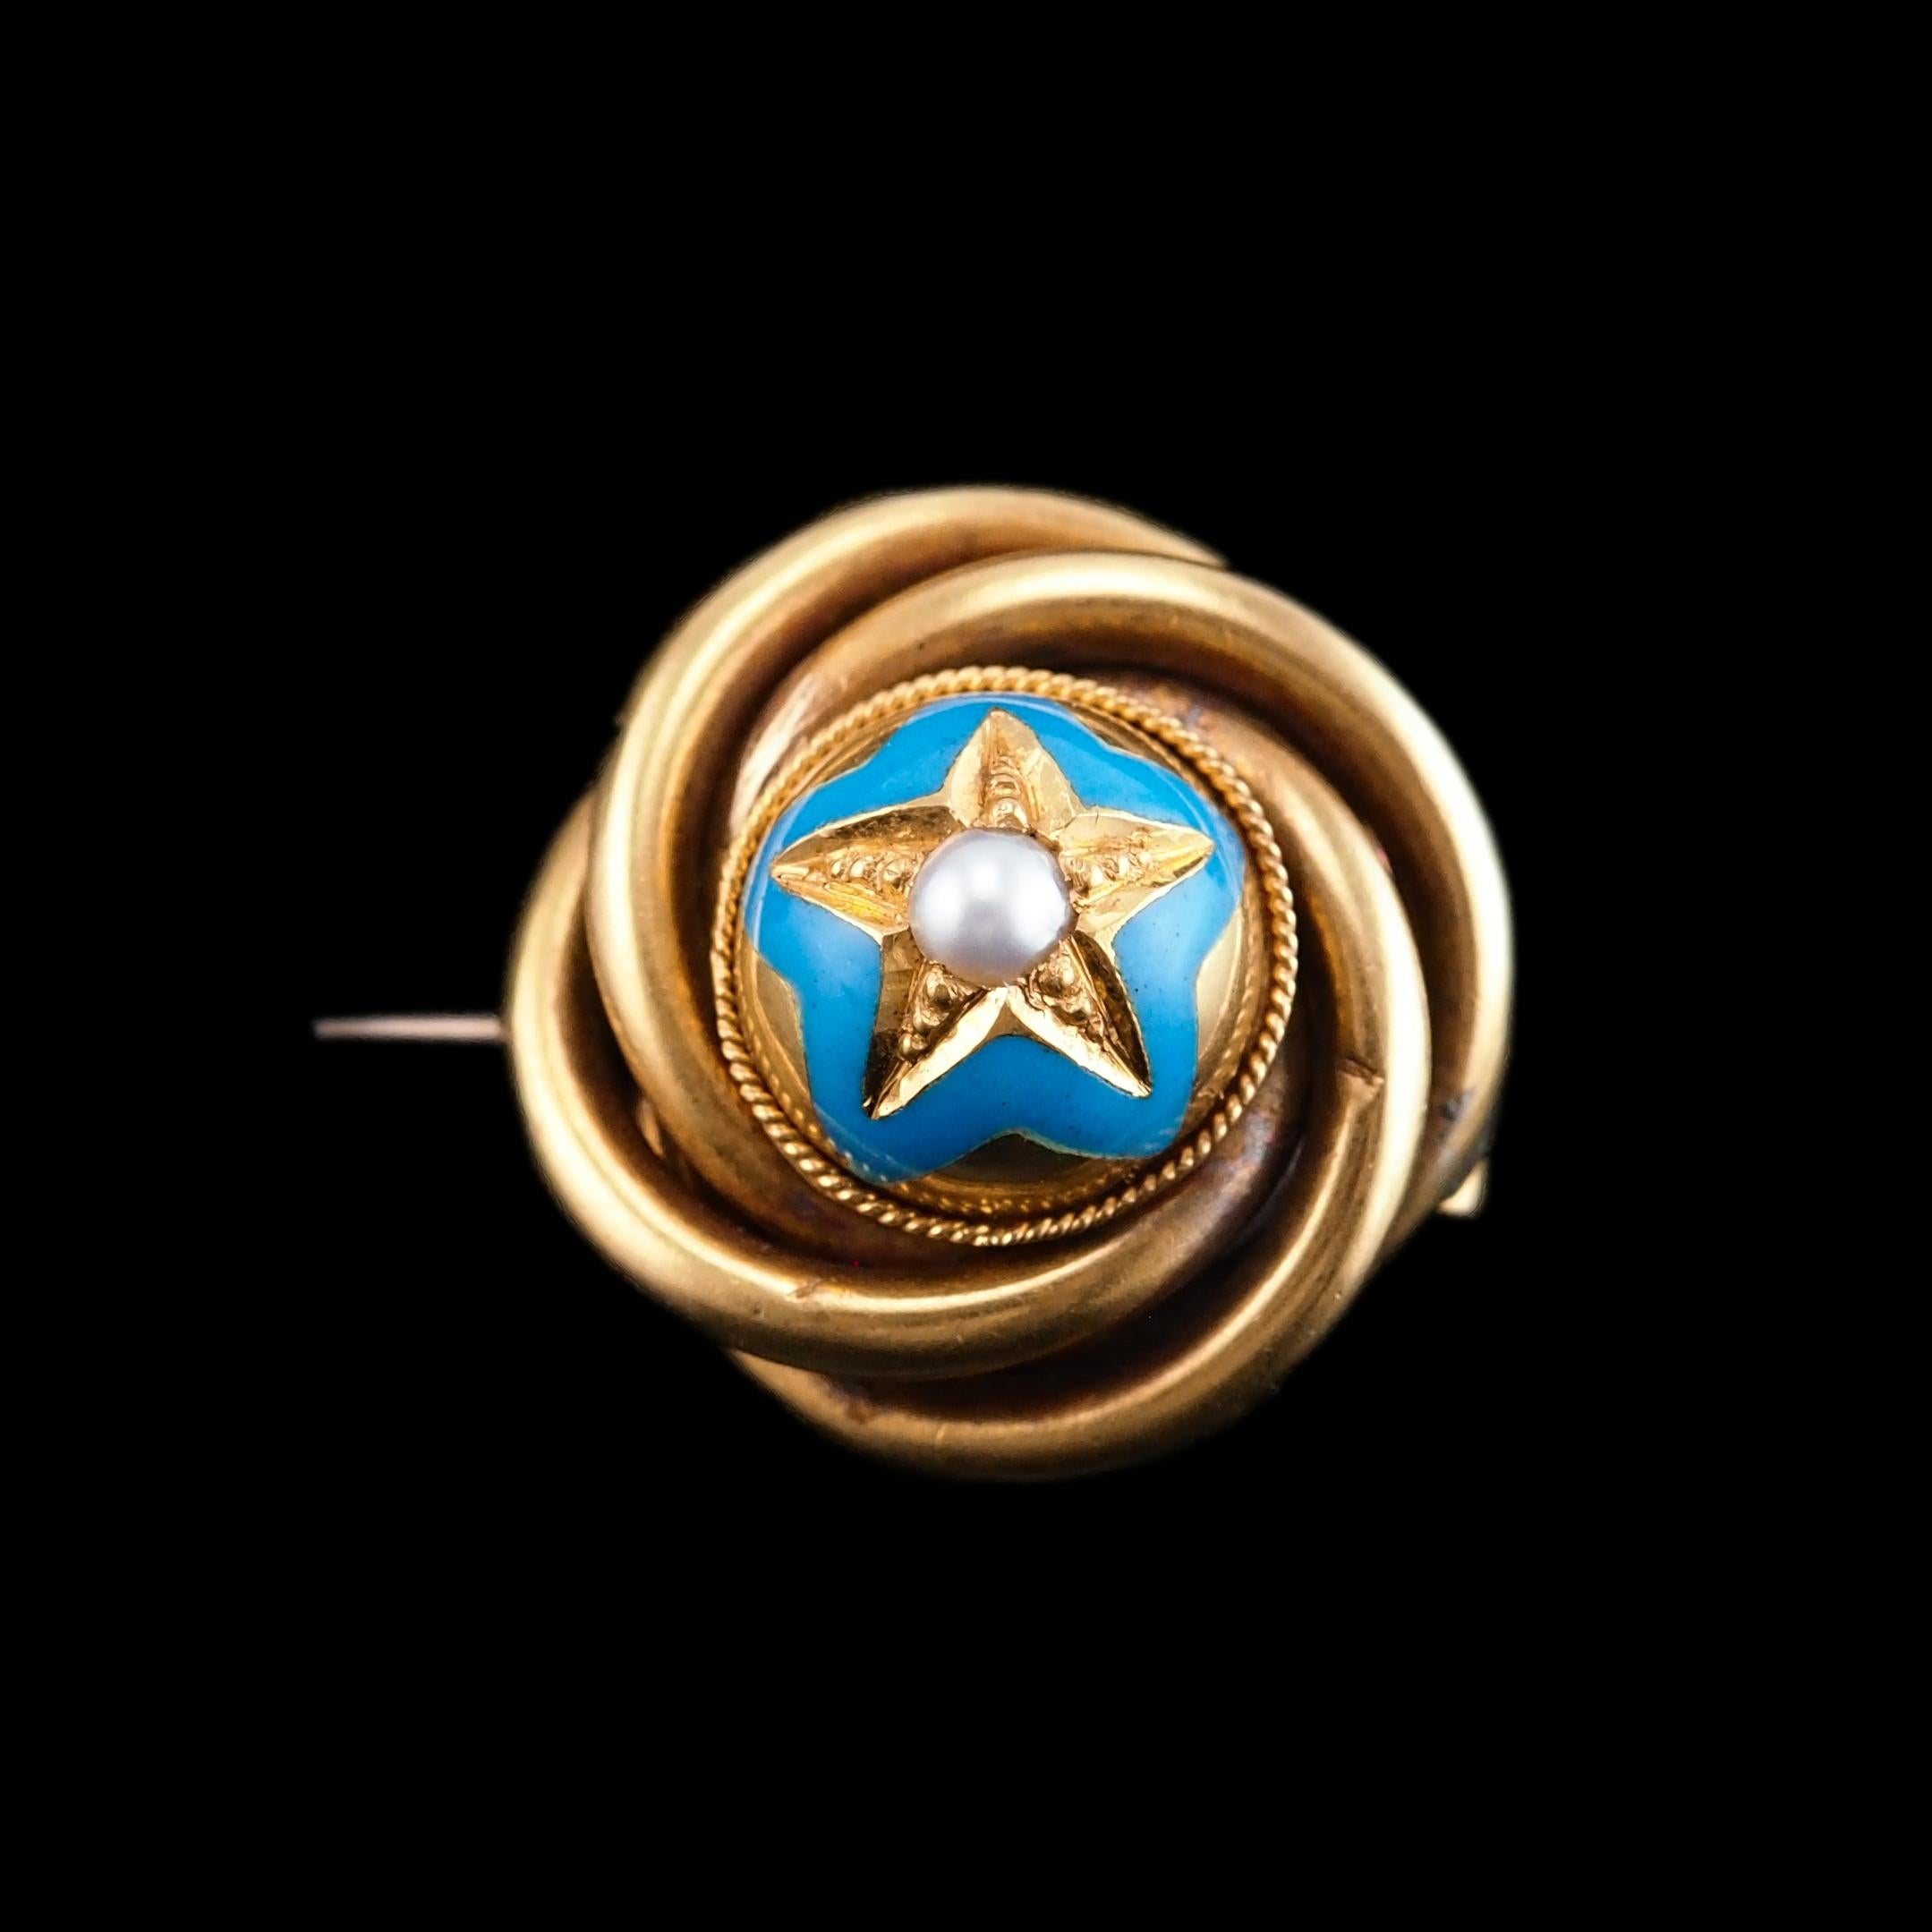 Antique Victorian 18K Gold Star Blue Enamel Pearl Brooch Pin - c.1880 For Sale 6